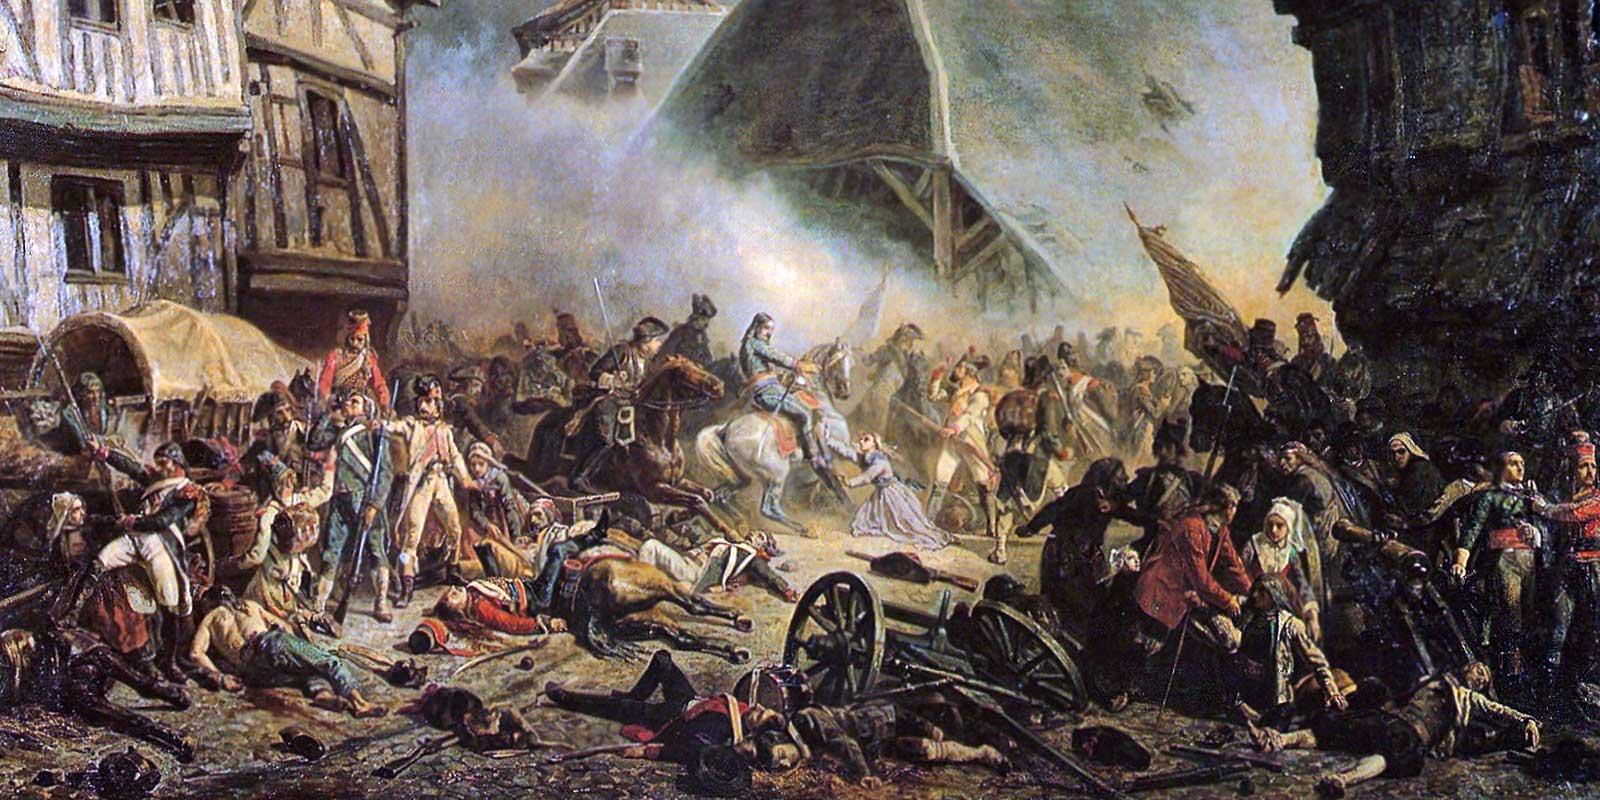 A painting depicting the french revolution